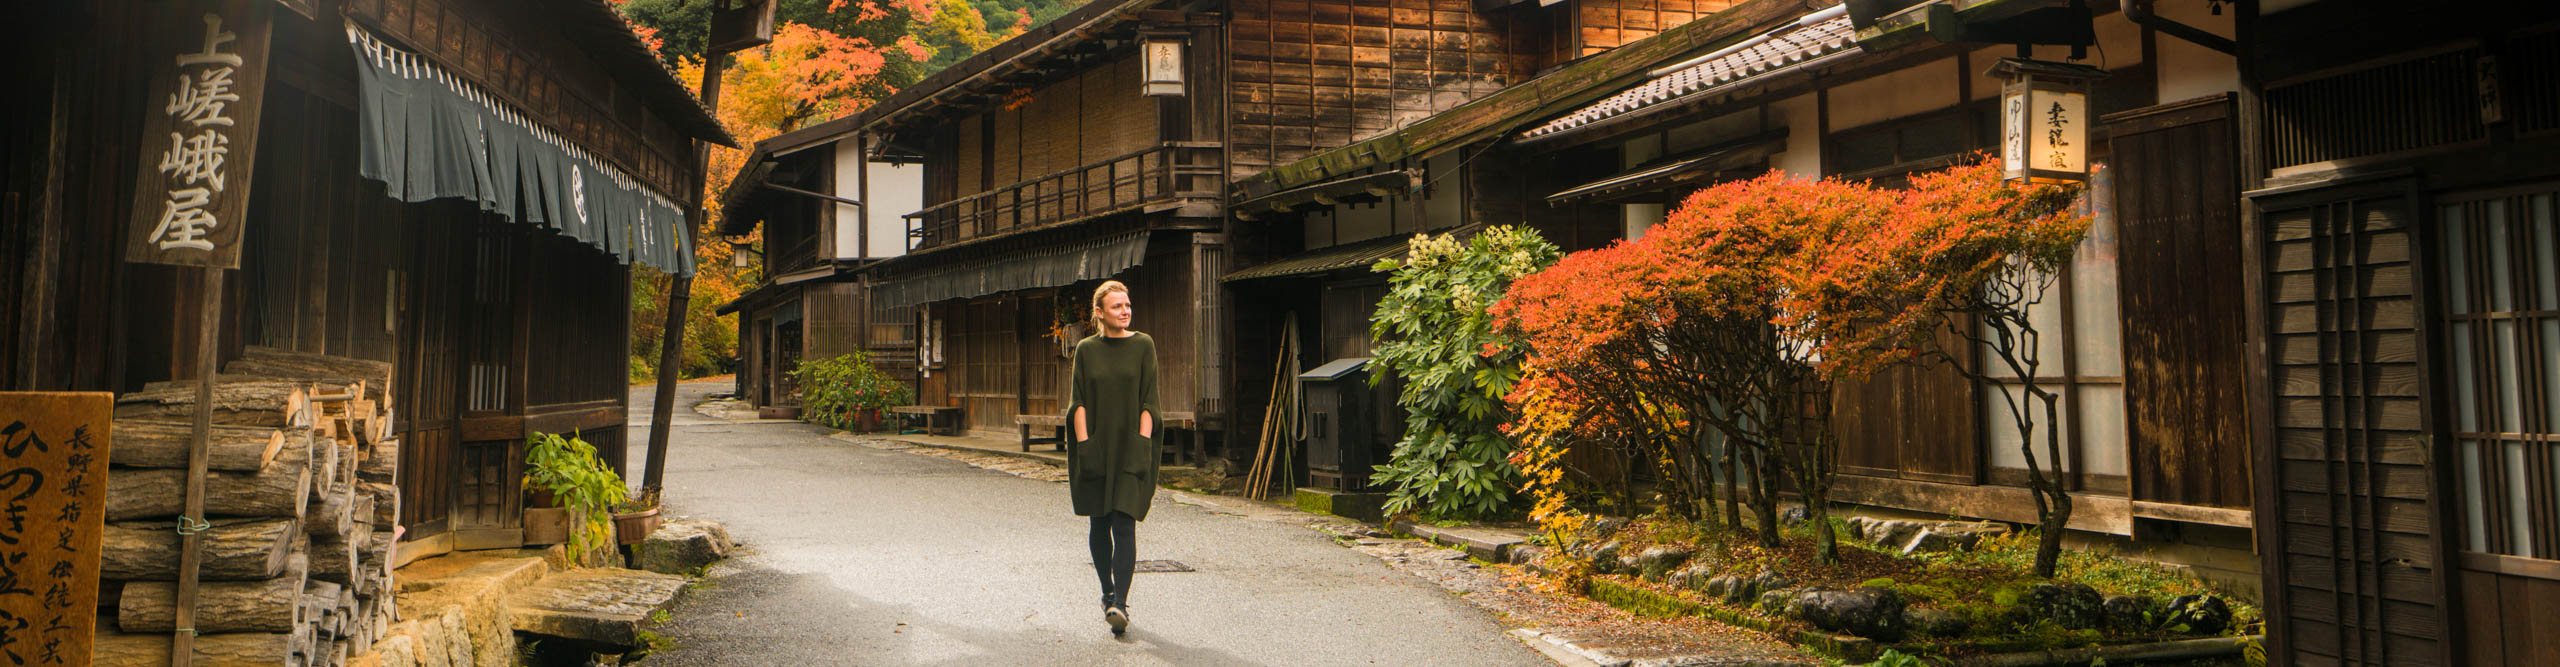 Woman walking down street line with traditional buildings  in Tsumago, Japan 